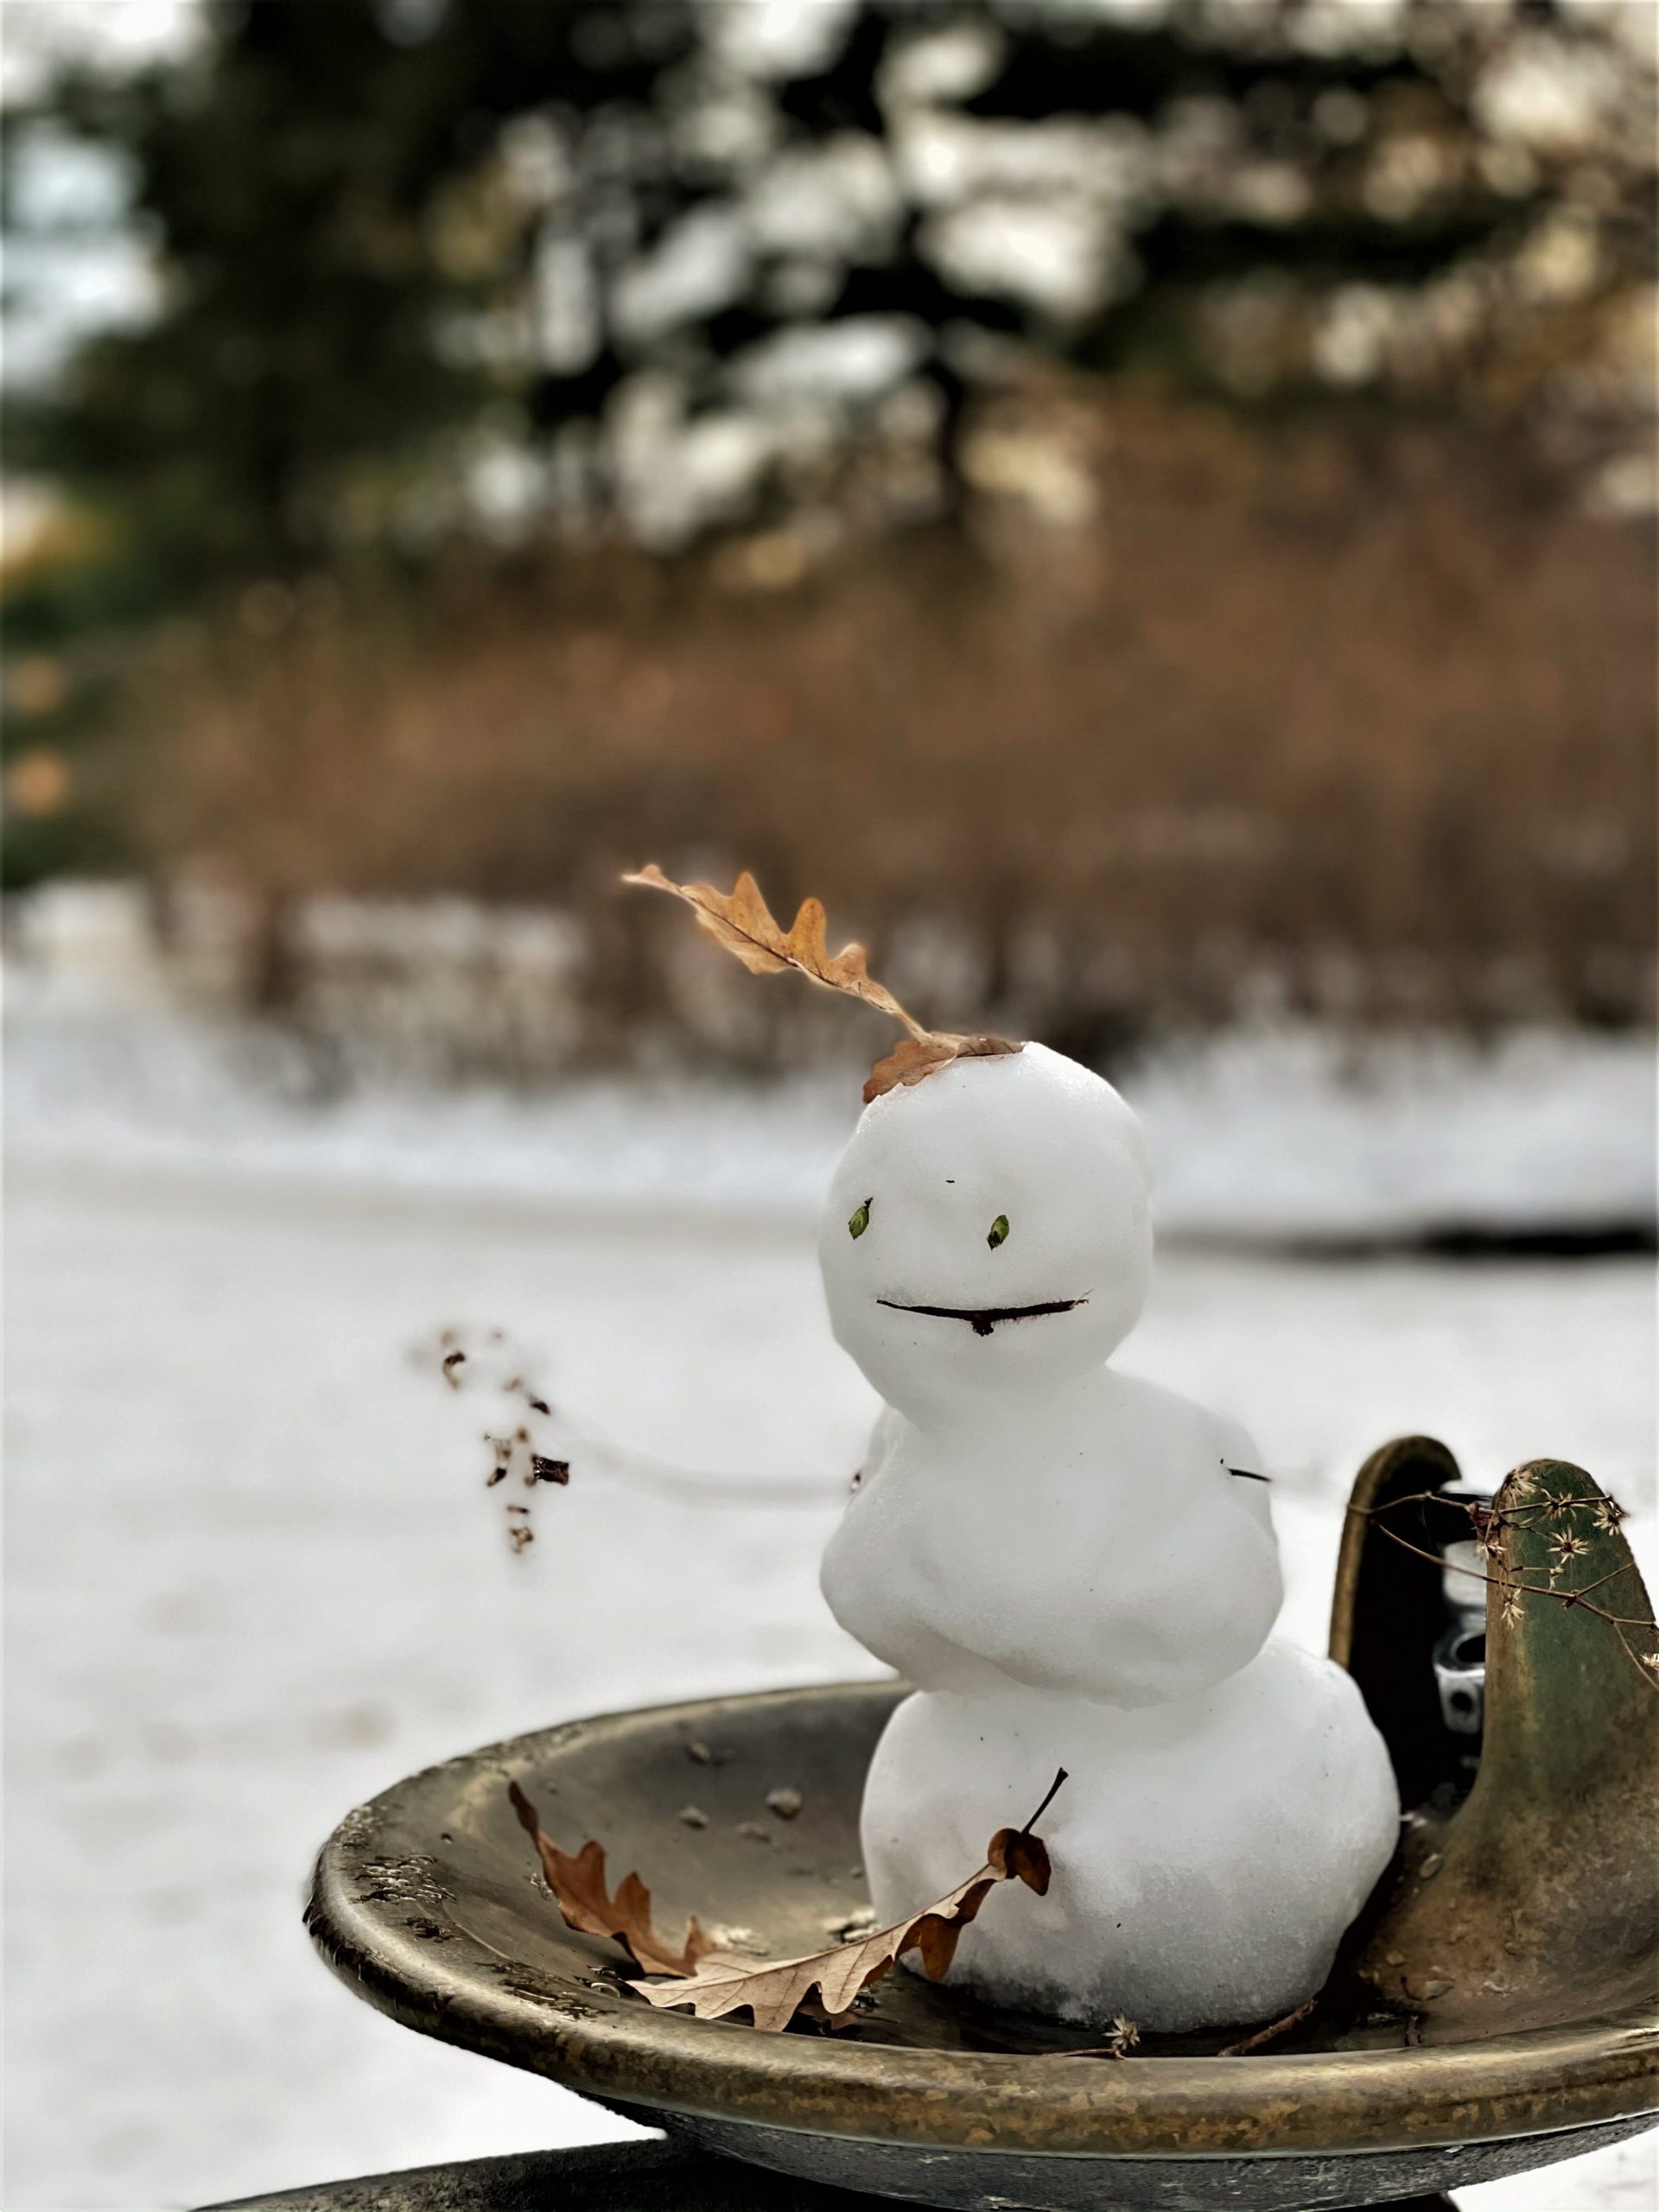 A small snowman on top of a water fountain.